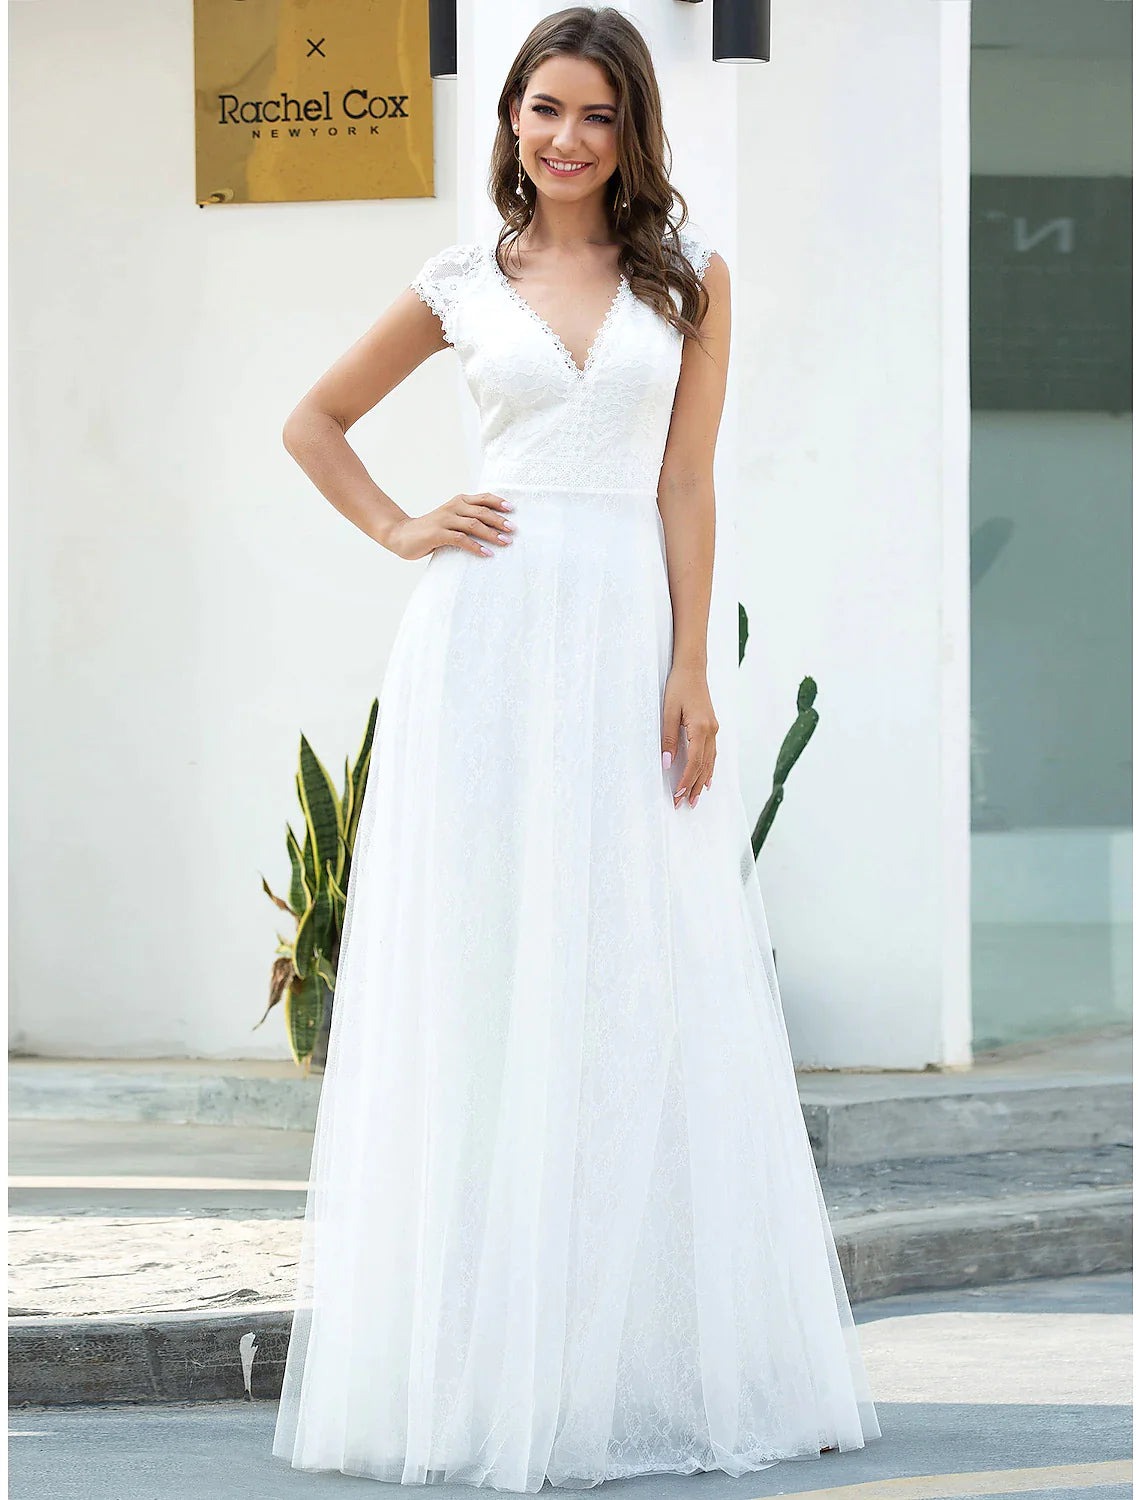 Beach Wedding Dresses Floor Length A-Line Short Sleeve V Neck Lace With Lace